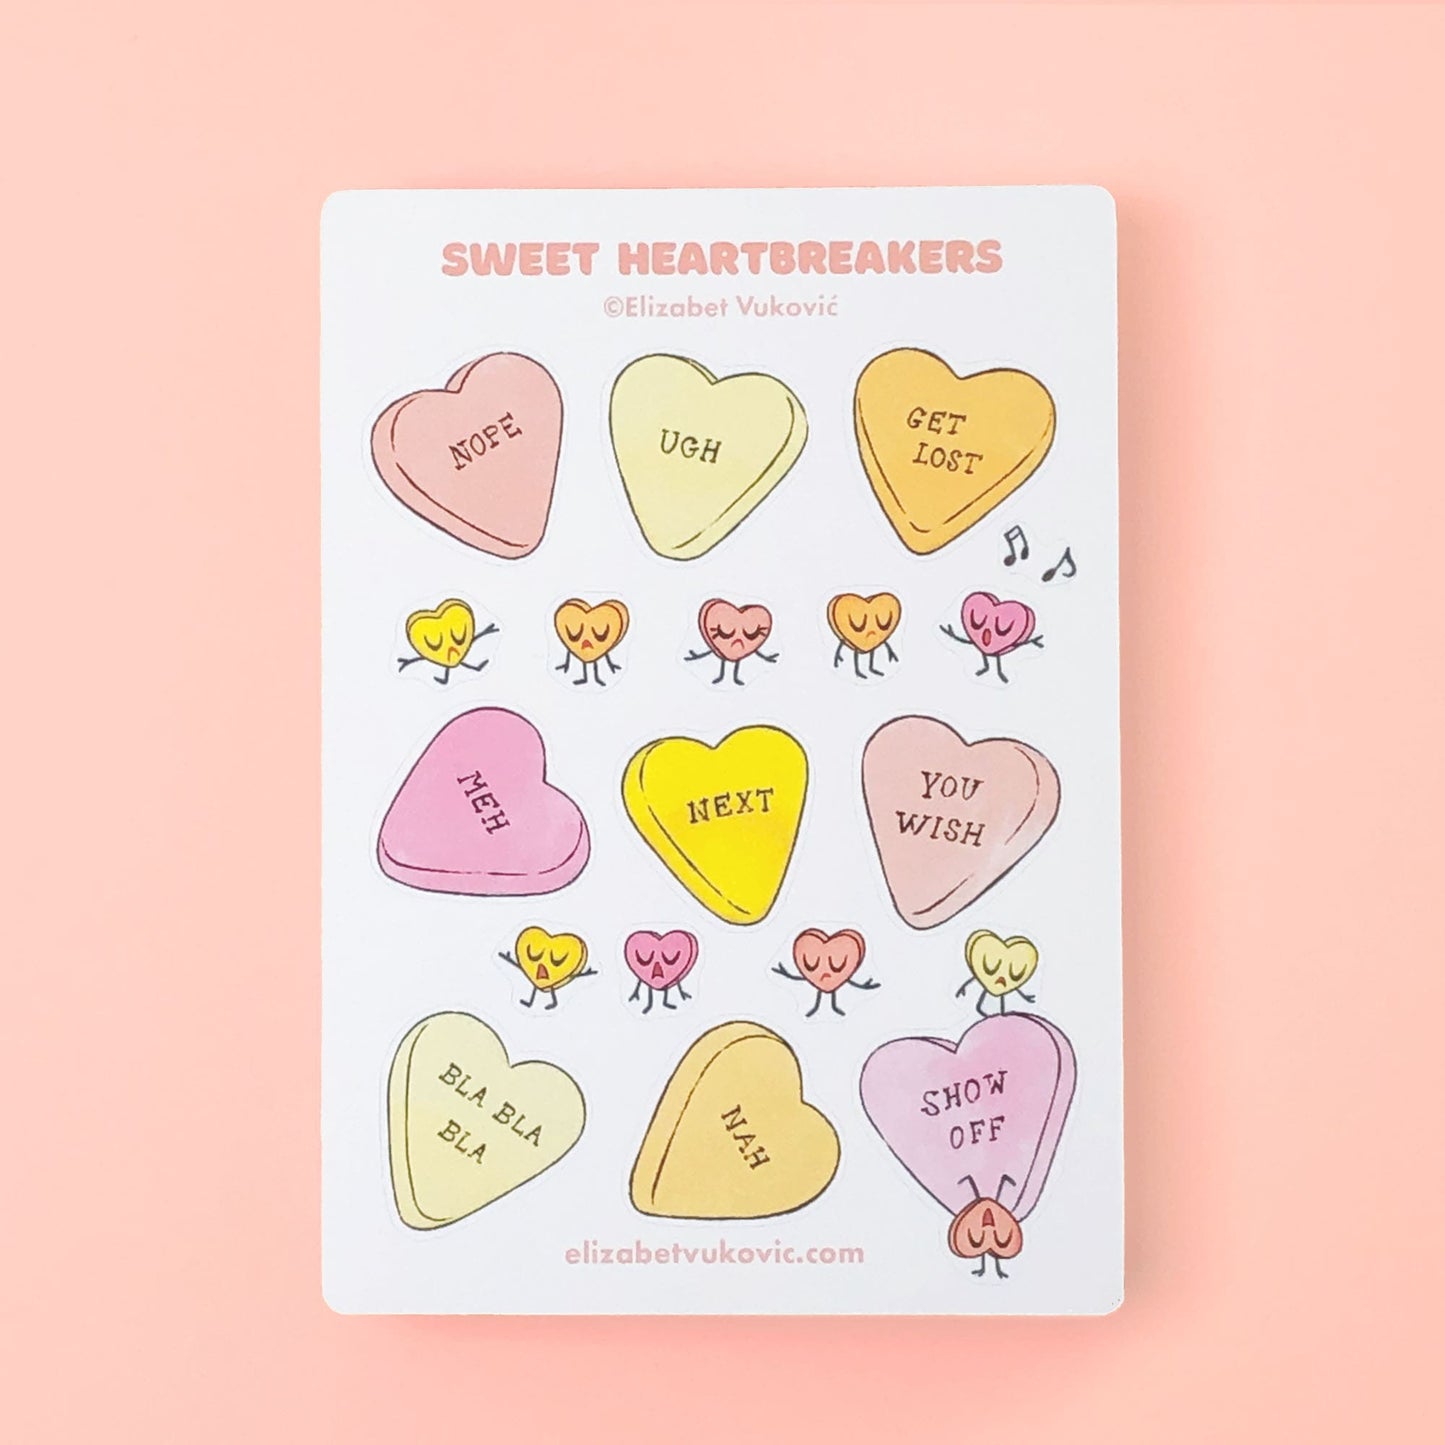 Whimsical candy hearts conversation sticker sheet.